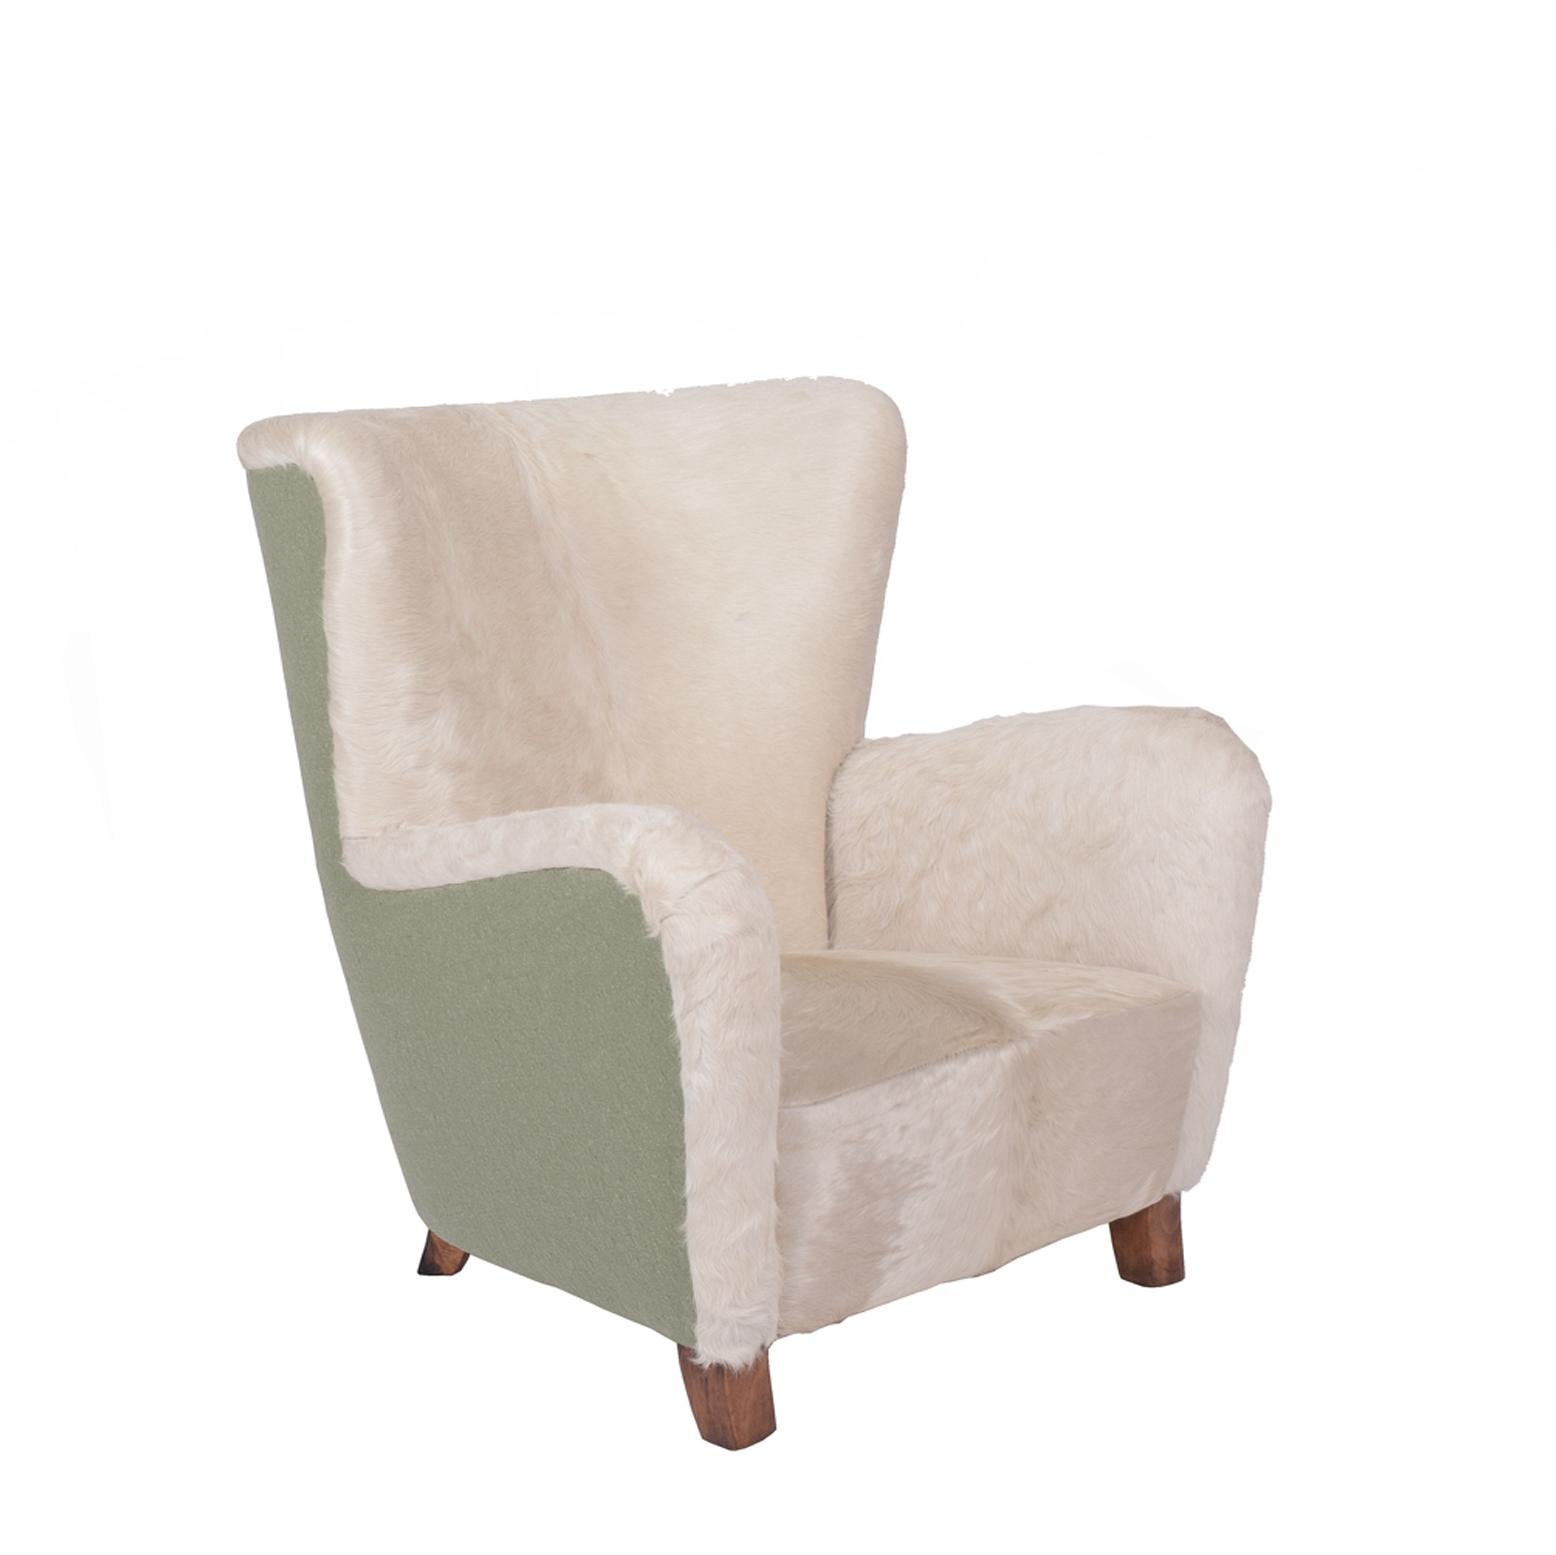 Newly upholstered wool fabric on outside and white argentine cow hide spring seat and back.